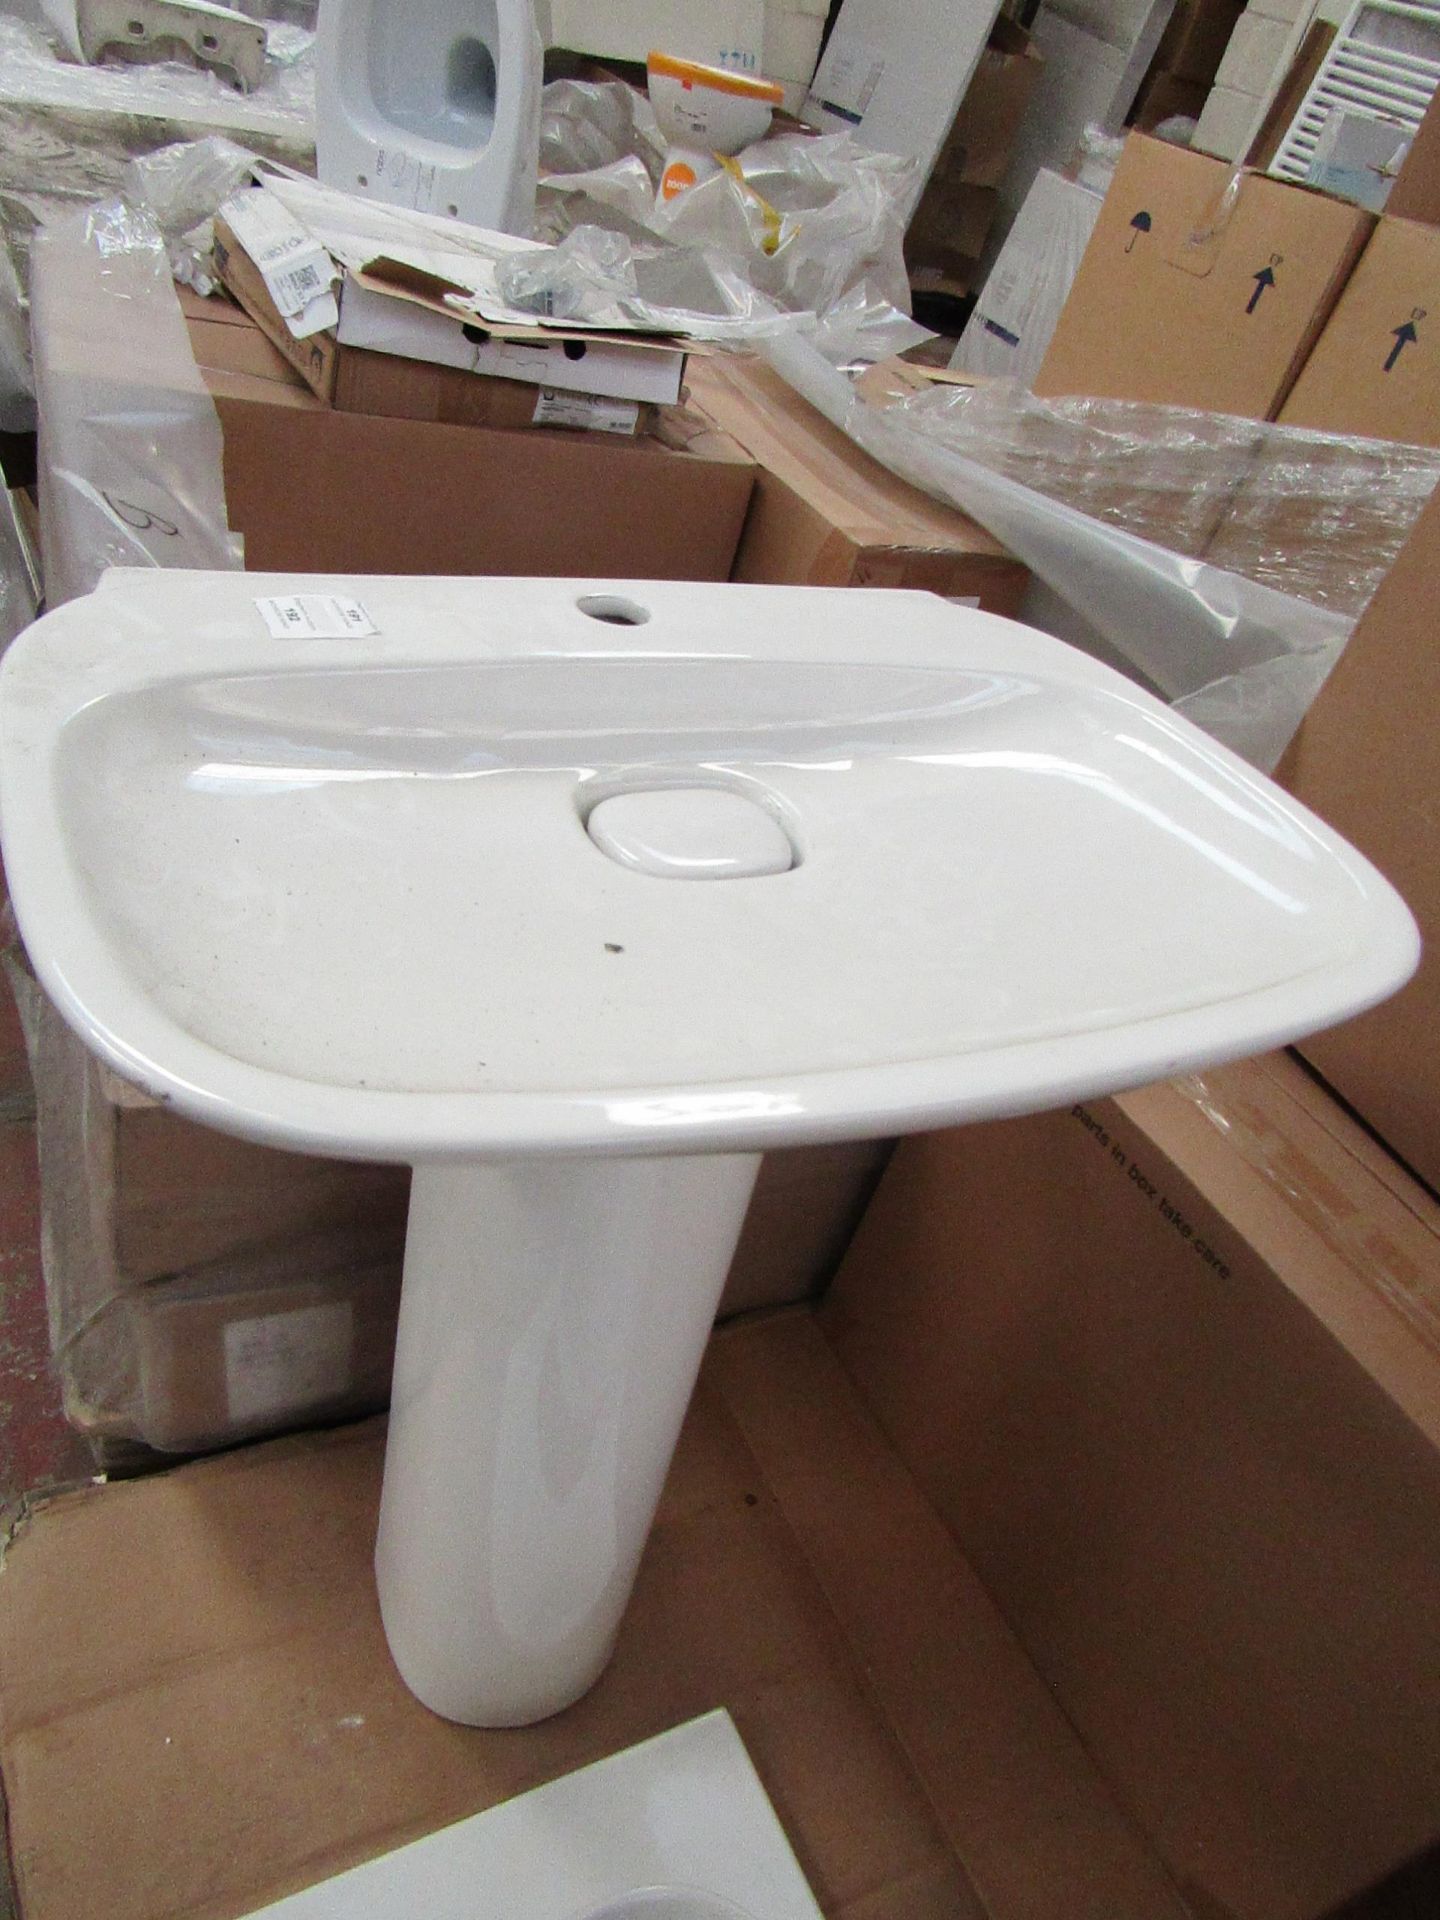 Laufen 600mm 1TH basin with ceramic cover and universal full pedestal, new and boxed.